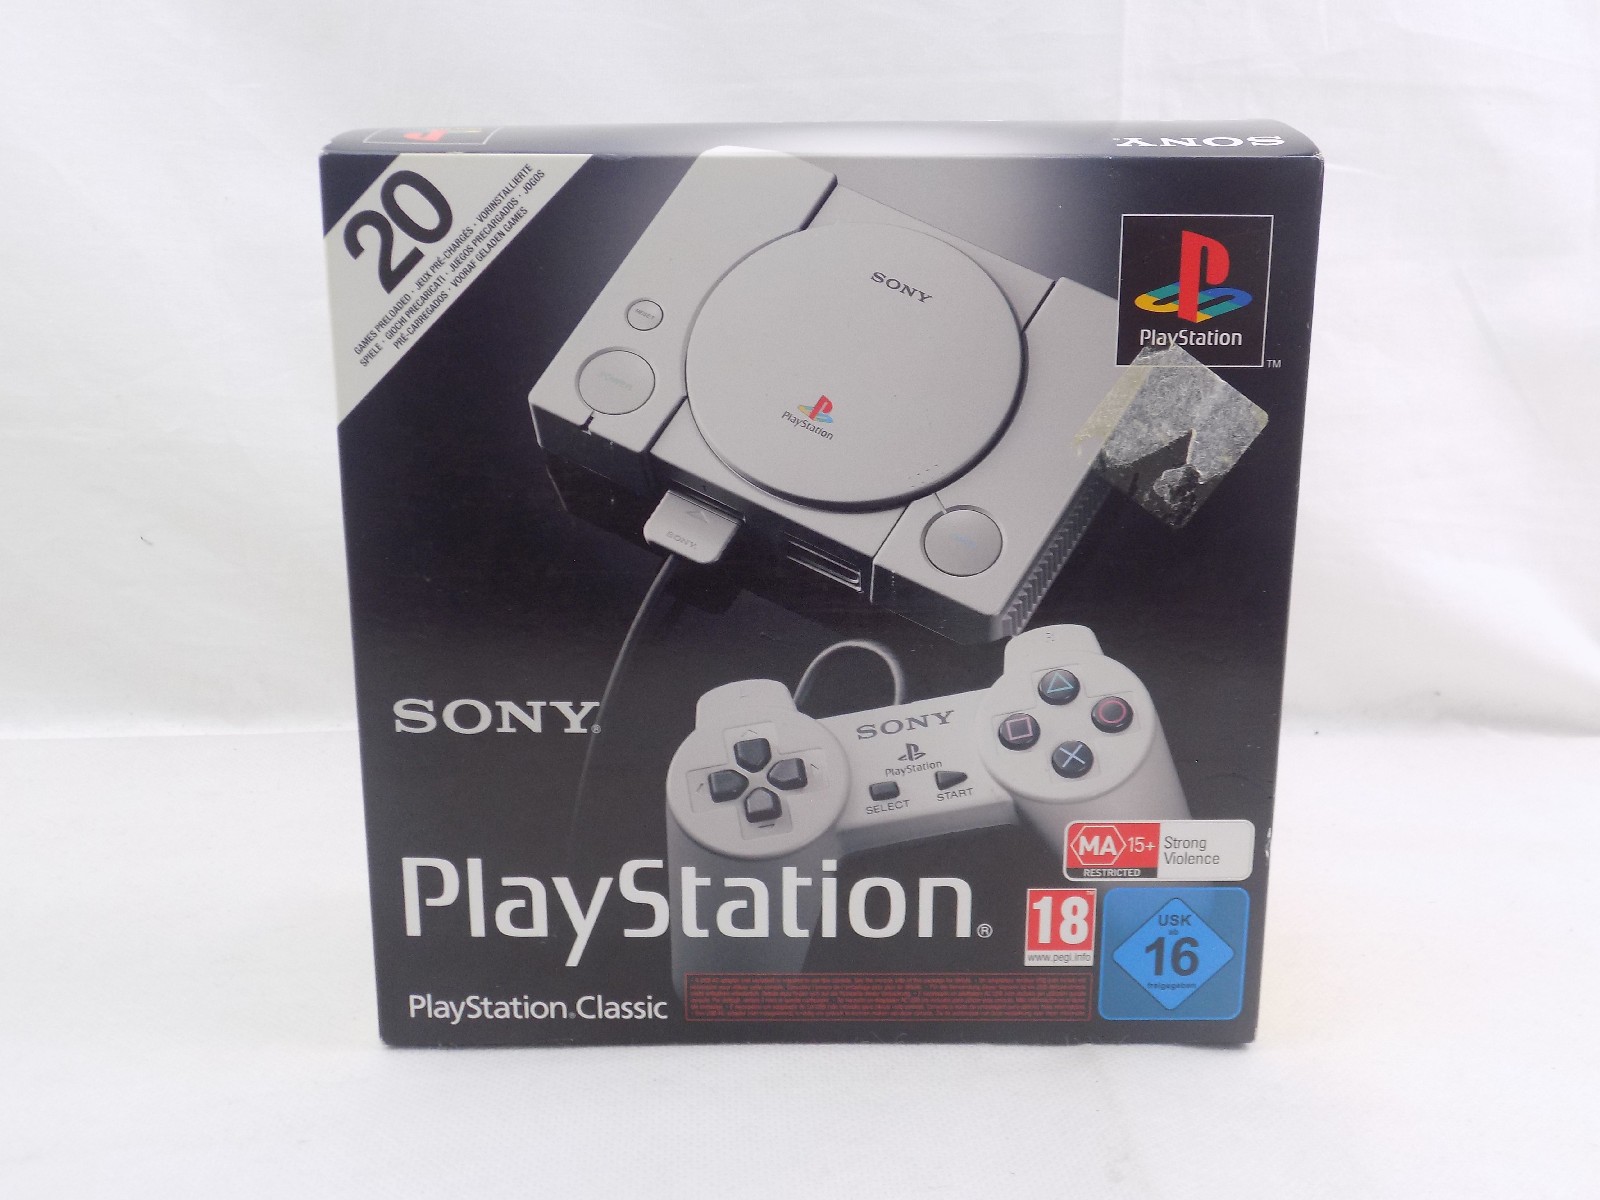 Legepladsudstyr retort Ruddy Like New Sony Playstation 1 Ps1 Classic Mini Console 20 Games PS One -  Starboard Games